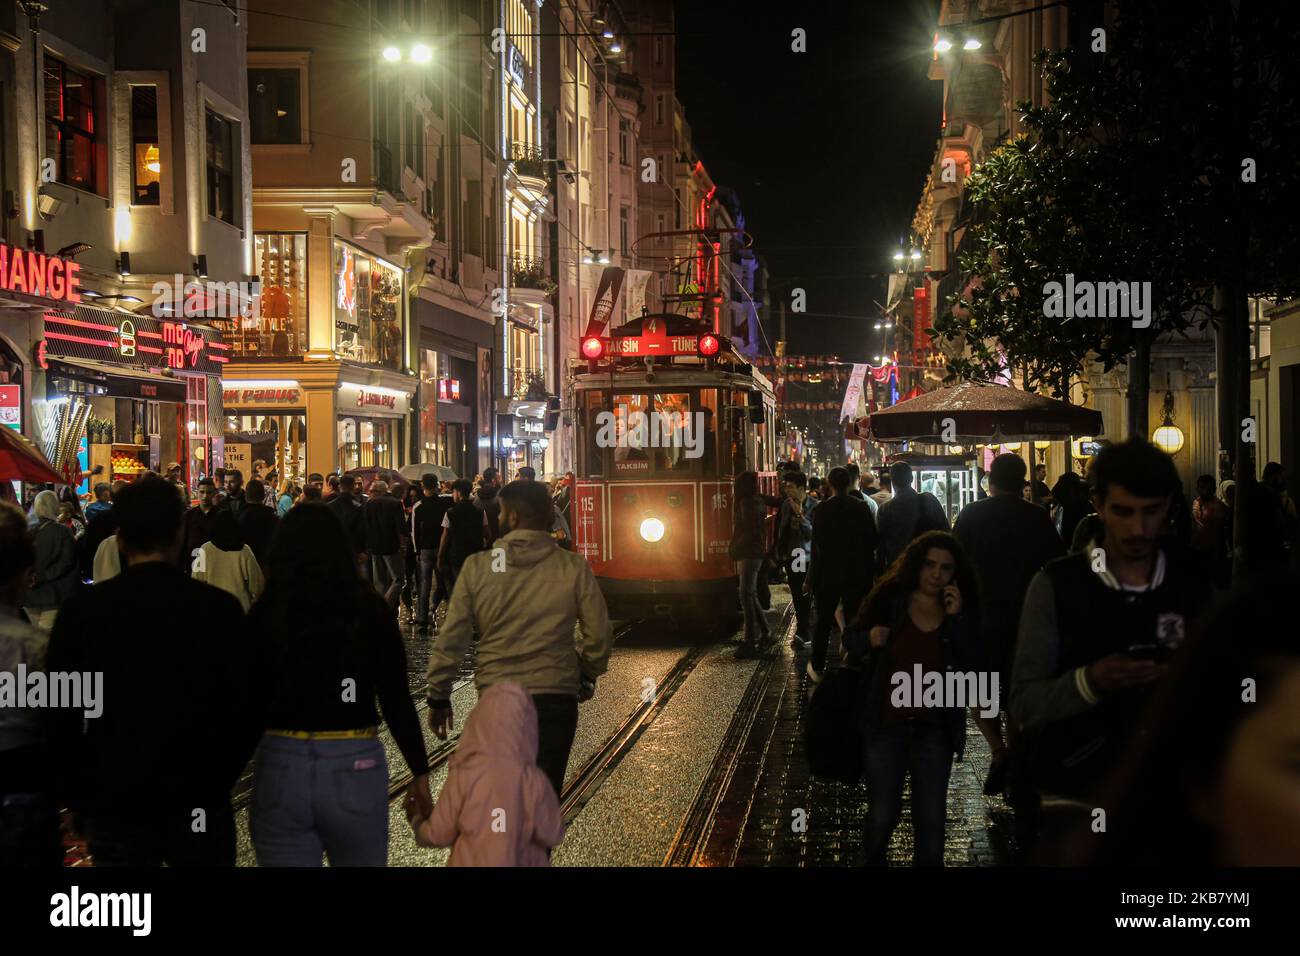 Tourists take souvenir photos with an old-fashioned red tram in Taksim Square and Istiklal Street on a rainy and cold day.The Taksim area of Istanbul is famous for its shopping, restaurants, cafes, bars and dance clubs 08 Oct 2019, Istanbul, Turkey Istanbul(Photo by Momen Faiz/NurPhoto) Stock Photo